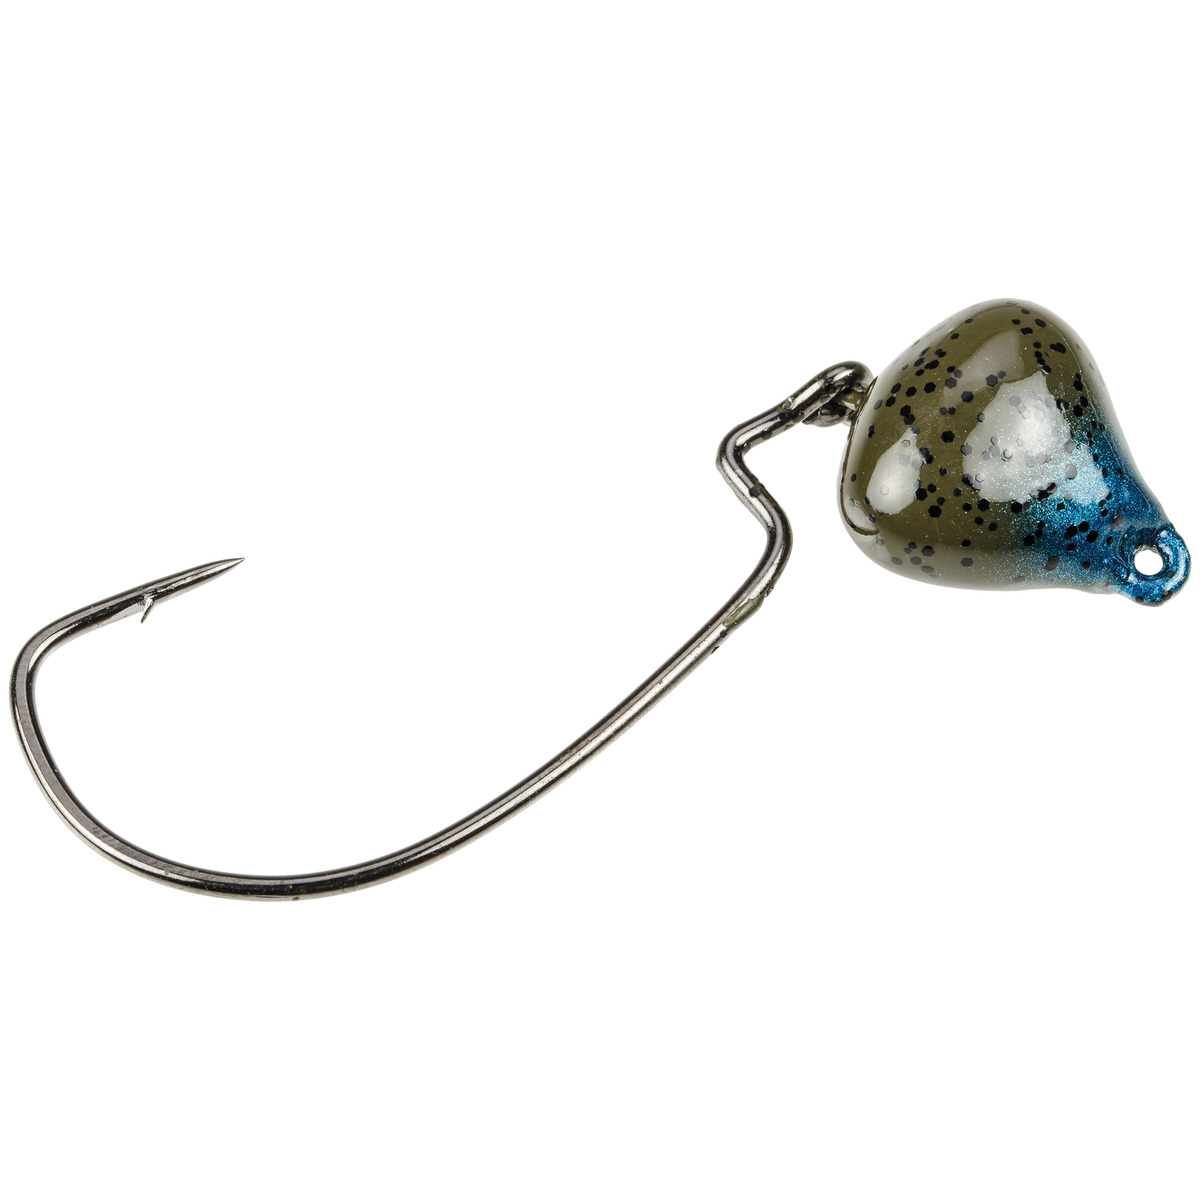 Strike King Md Jointed Structure Head - Blue Craw 21.3G